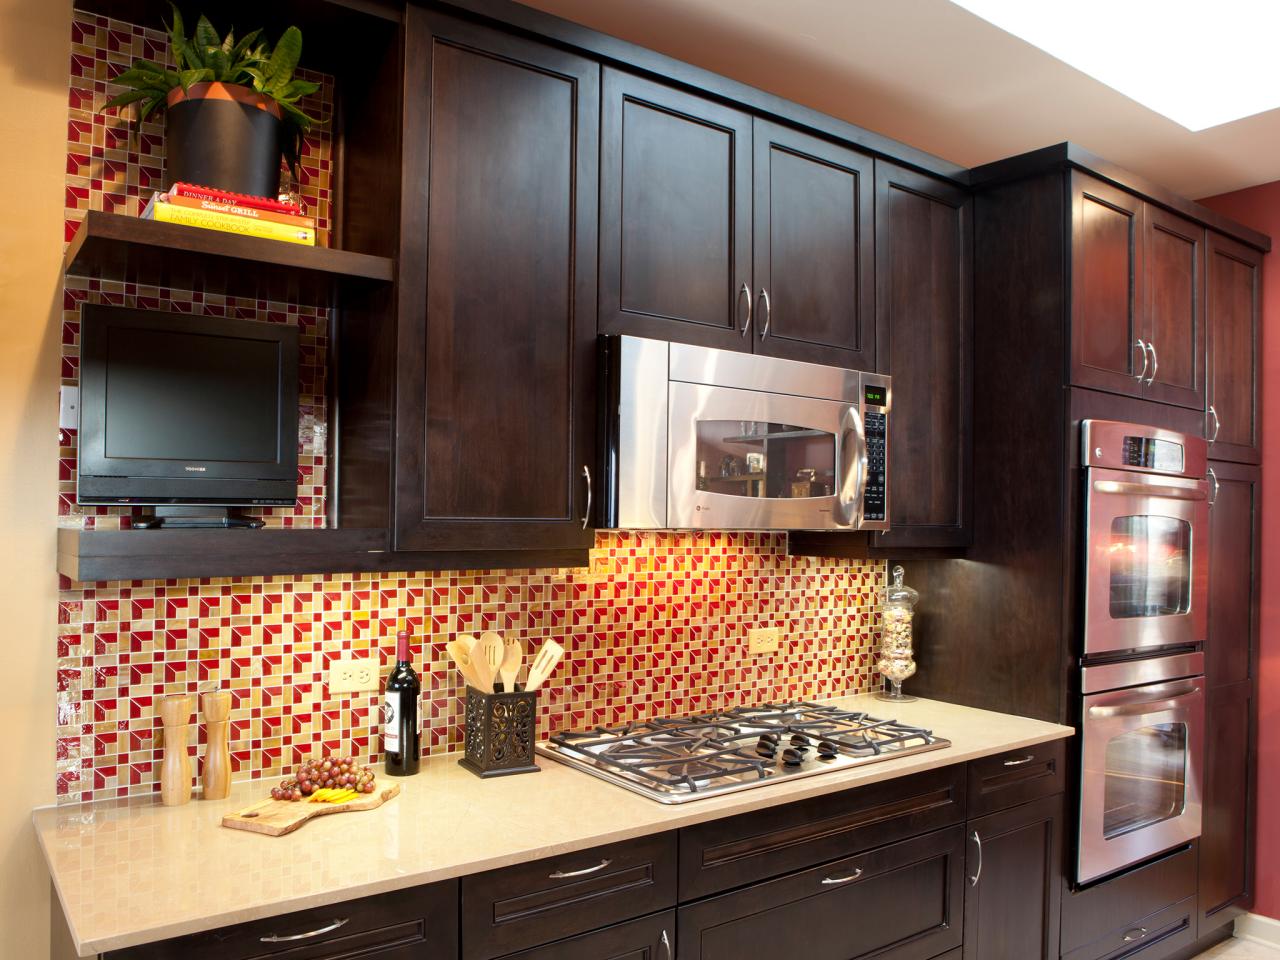 Restaining Kitchen Cabinets Pictures, Best Wood Stain Brand For Kitchen Cabinets